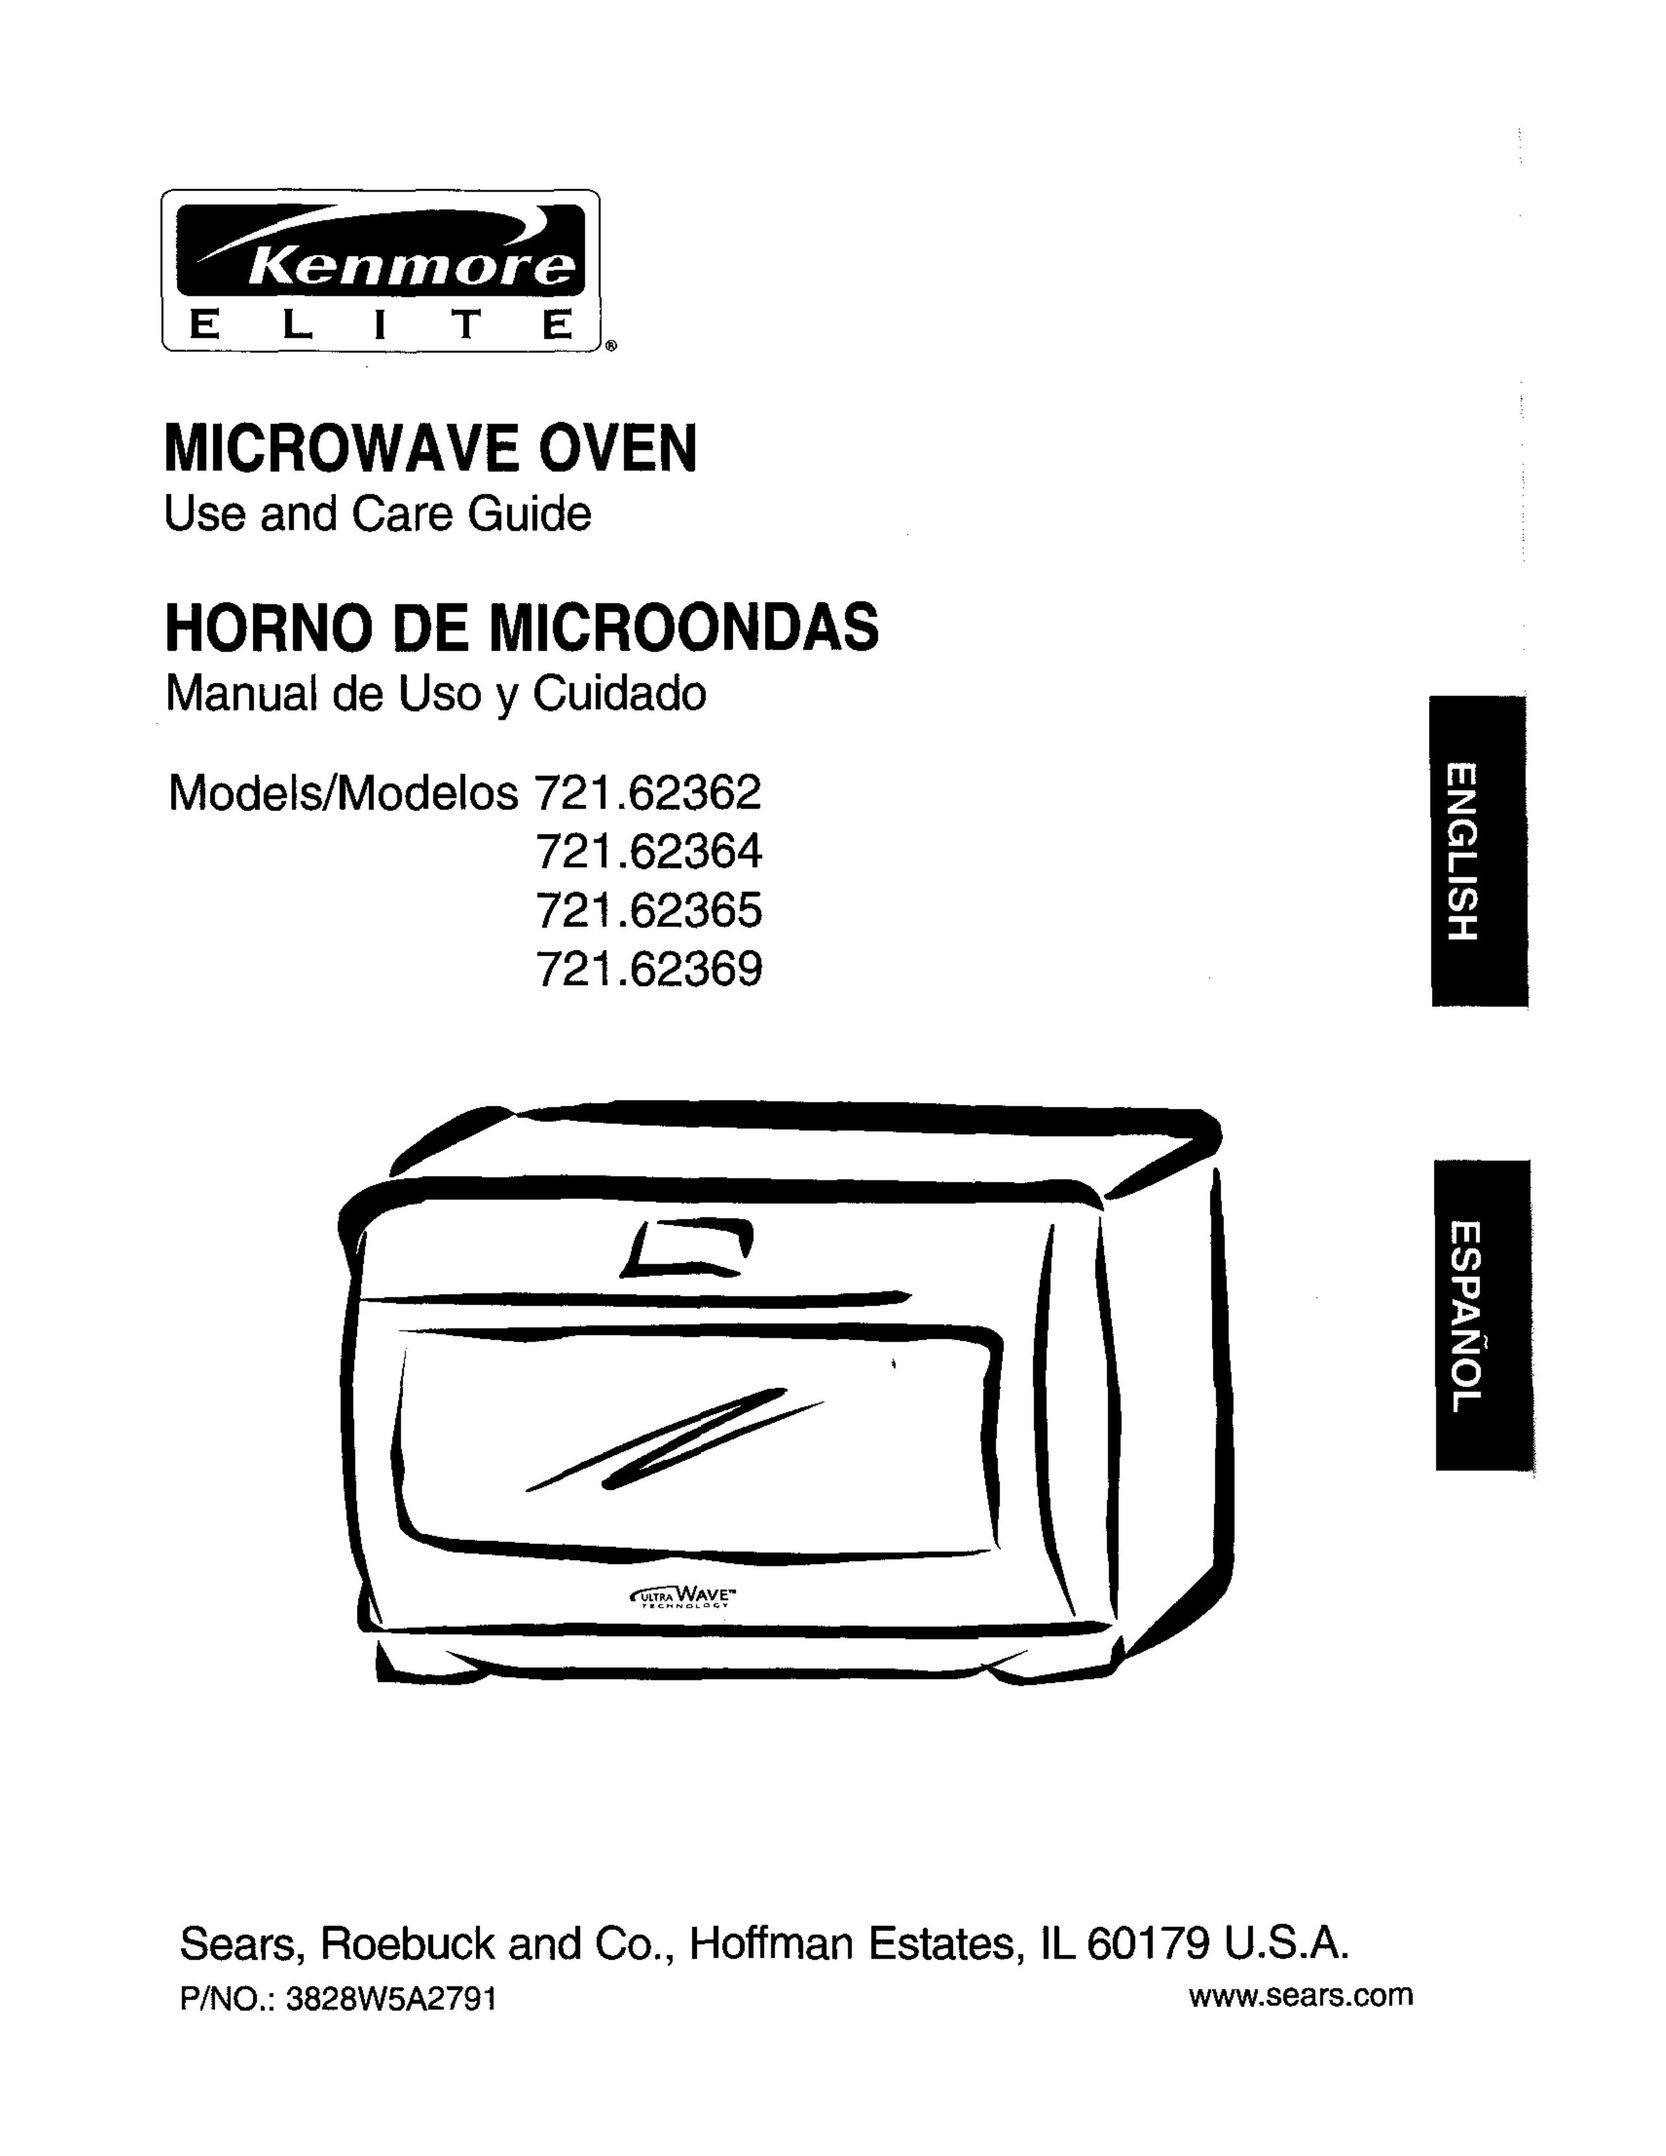 Kenmore 721.62364 Microwave Oven User Manual